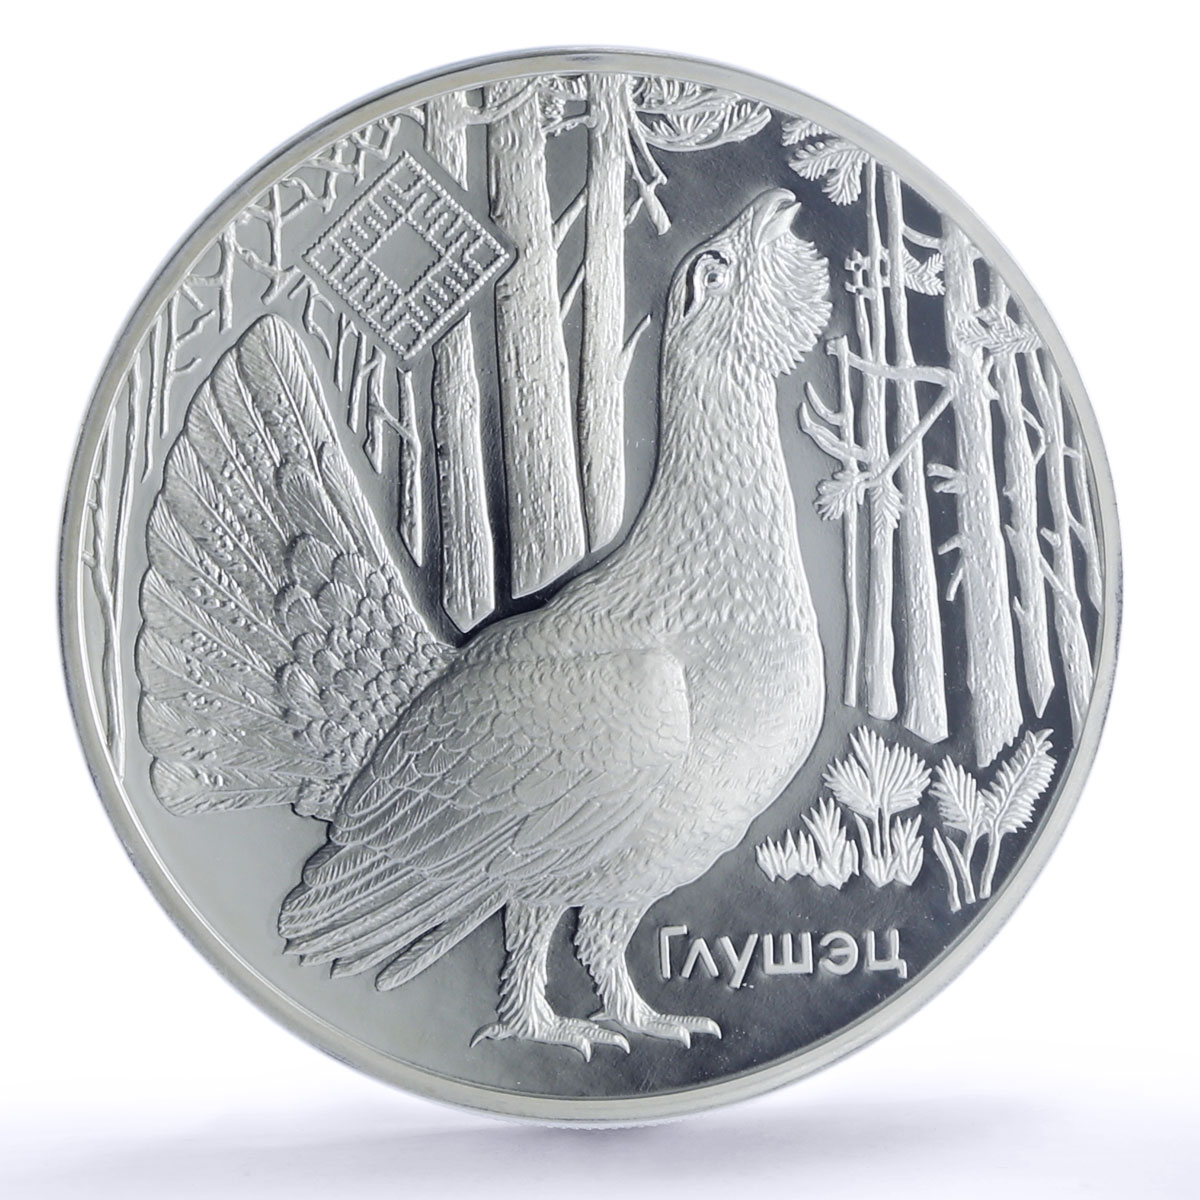 Belarus 20 rubles Nature Reserves Kotra Capercaillie PR70 PCGS silver coin 2018